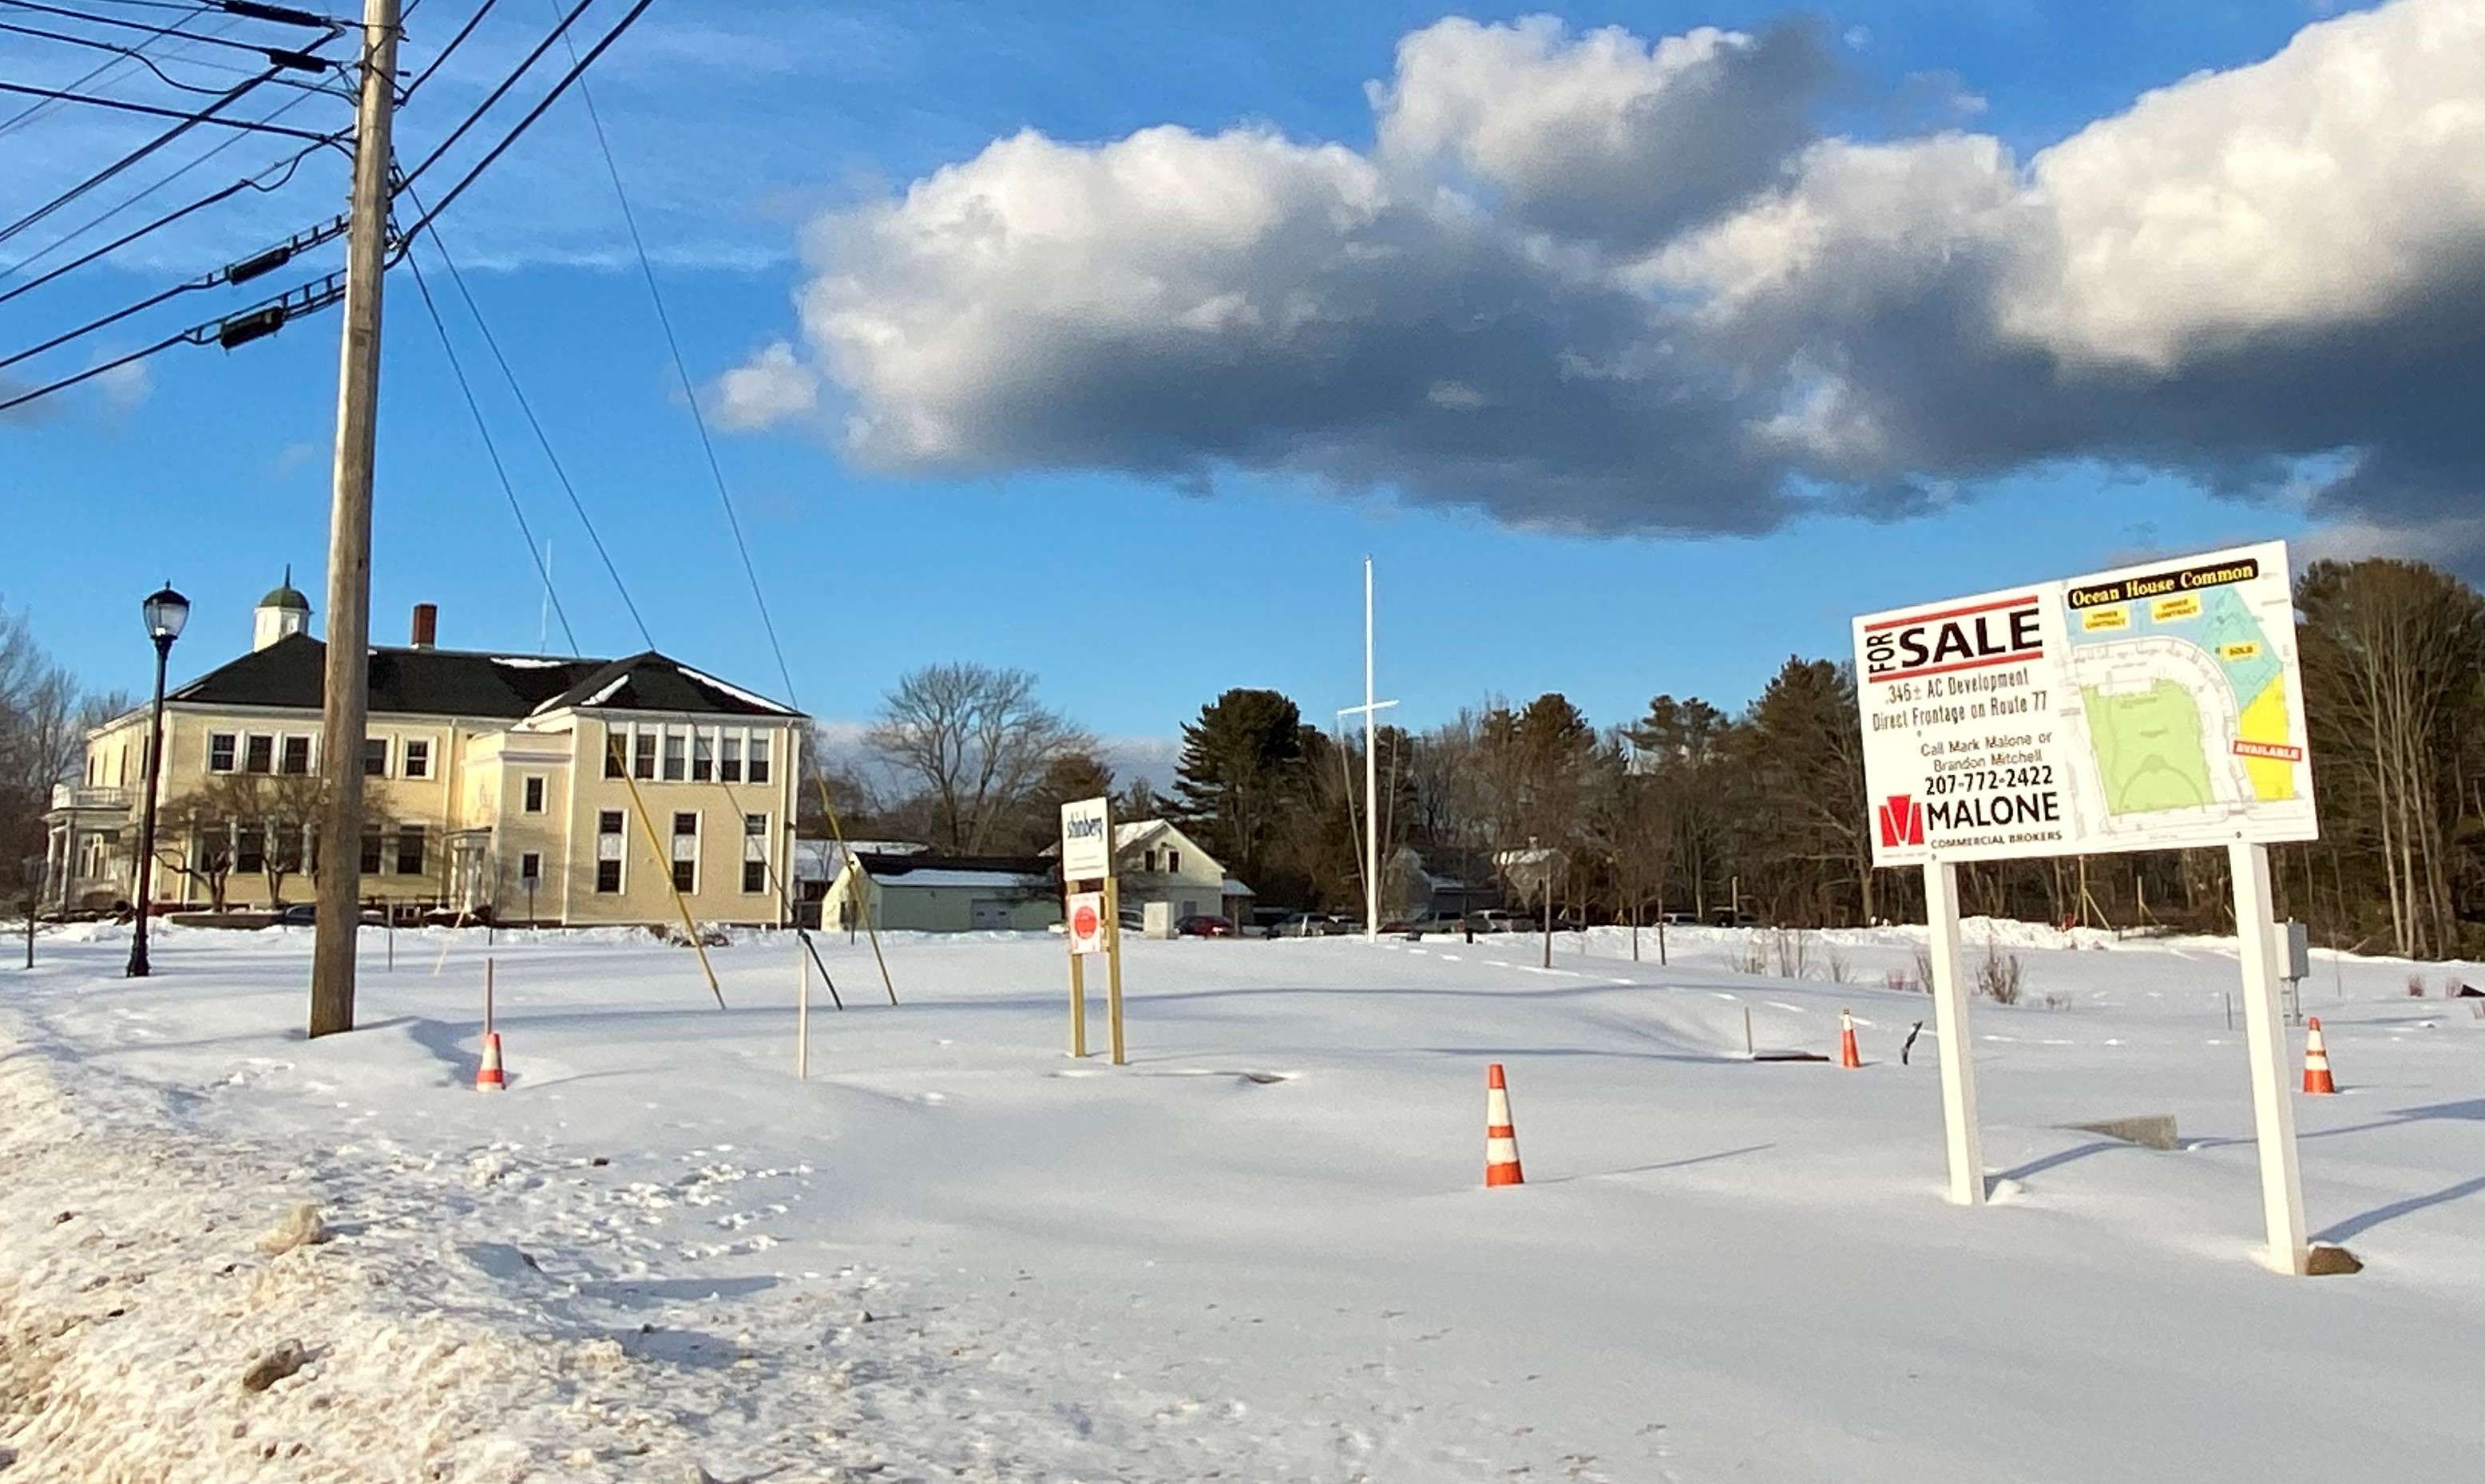 a snowy expanse with a real estate broker's sign showing lots with a large clapboard yellow building, cape elizabeth's town hall, in the background